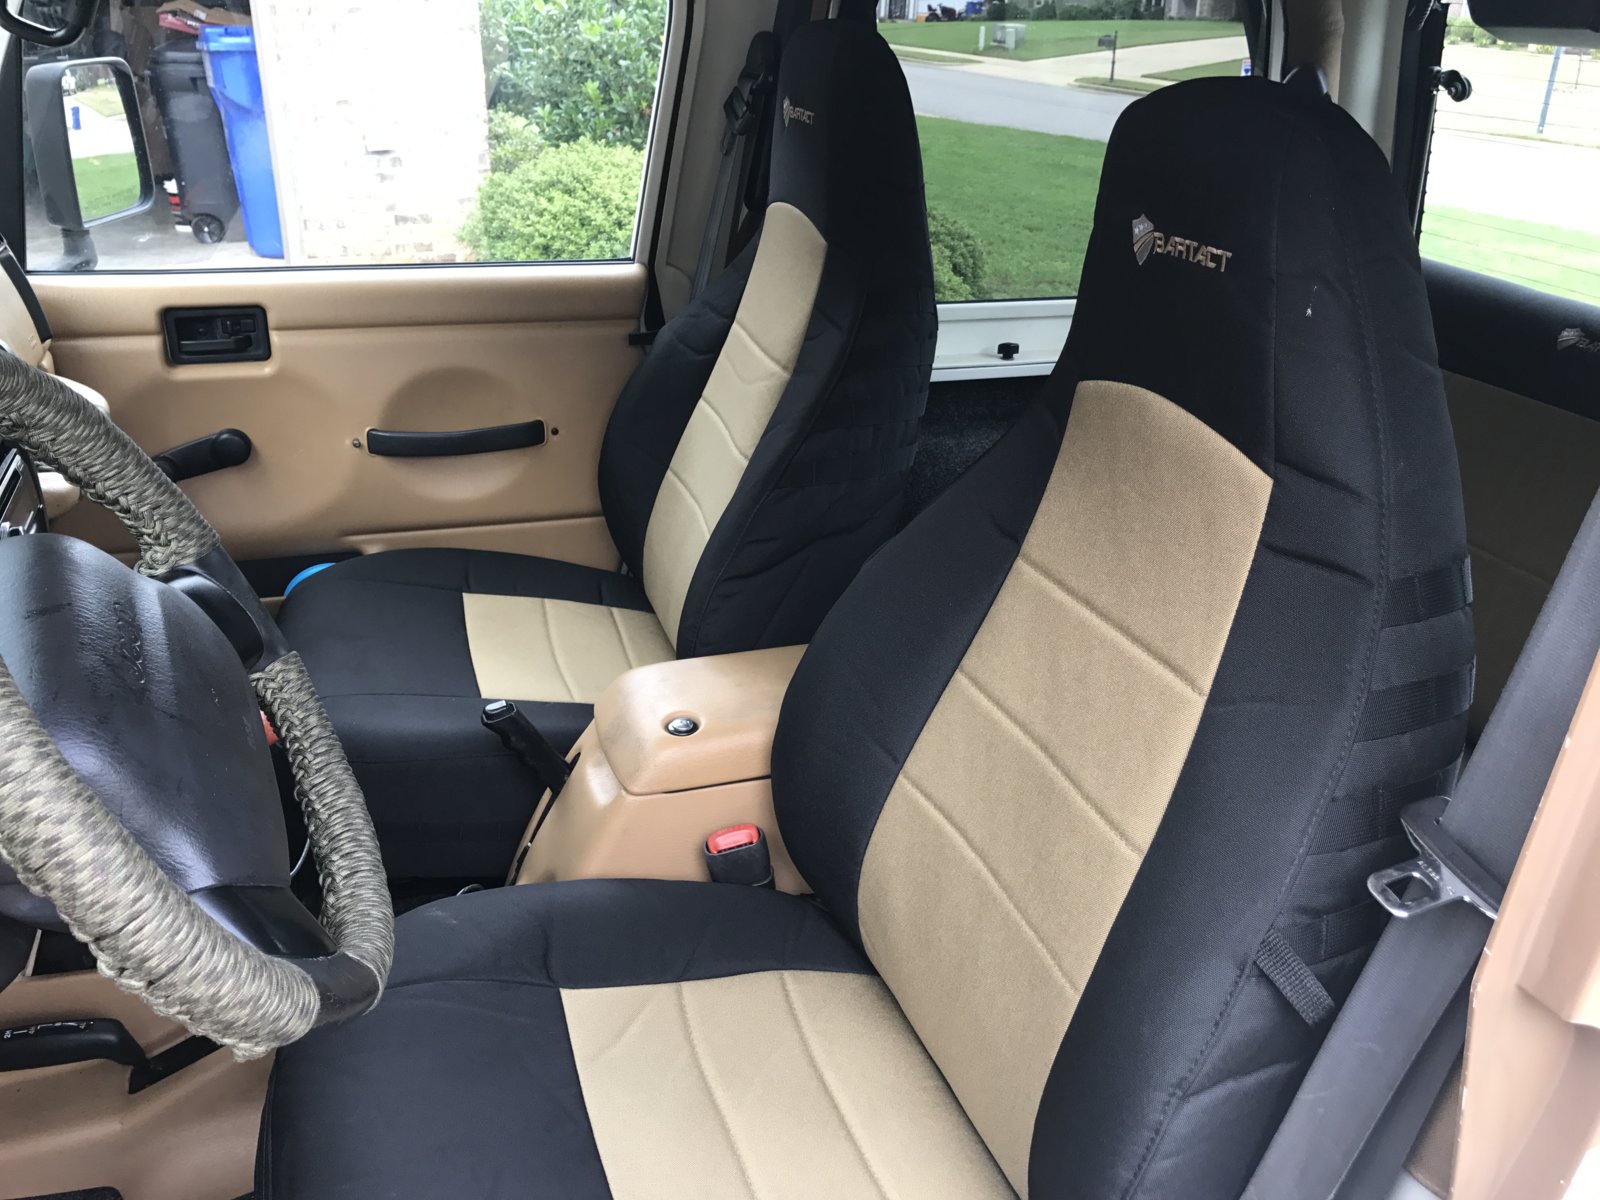 SOLD - For Sale: TJ Bartact Seat Covers | Jeep Wrangler TJ Forum